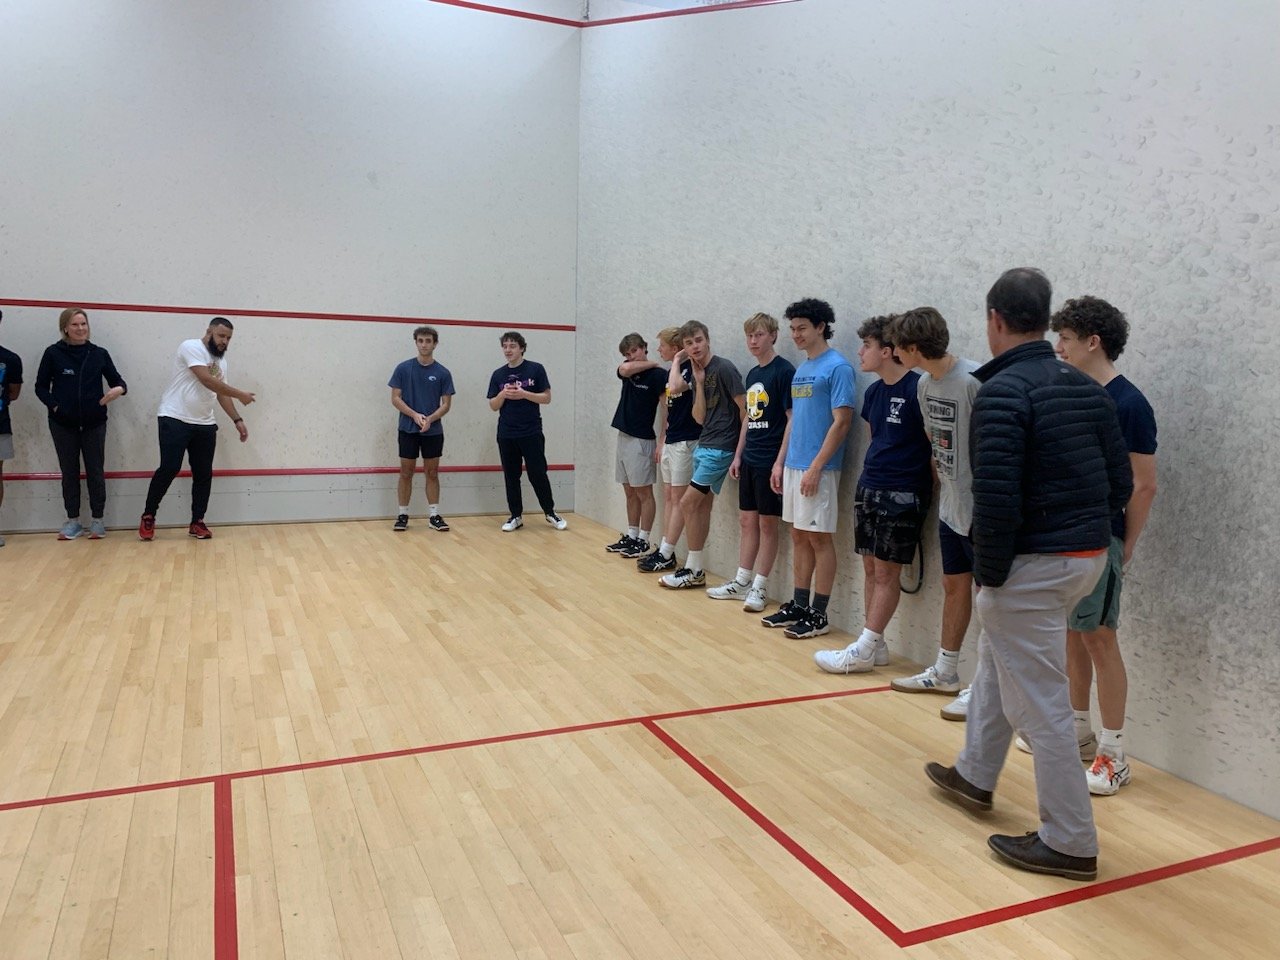 Members of the Barrington High School Squash Club pick up some instruction earlier this season.